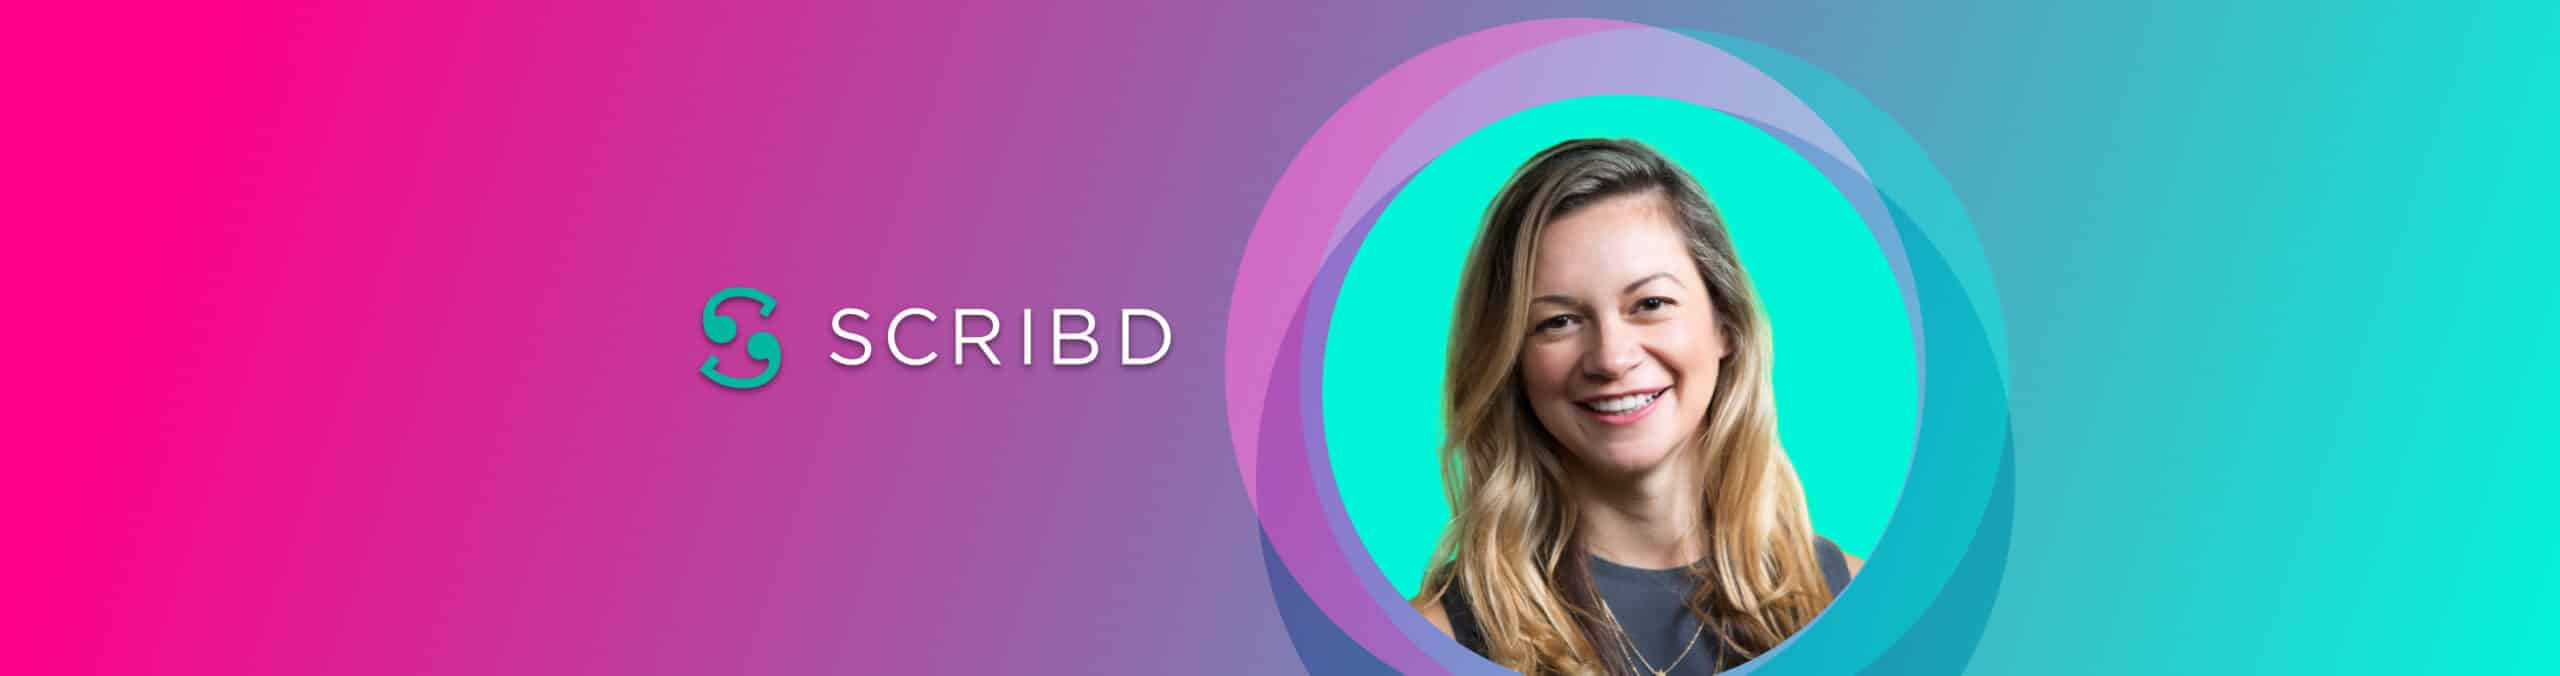 Ariana Hellebuyck joins Scribd’s Executive Team as Chief Marketing Officer